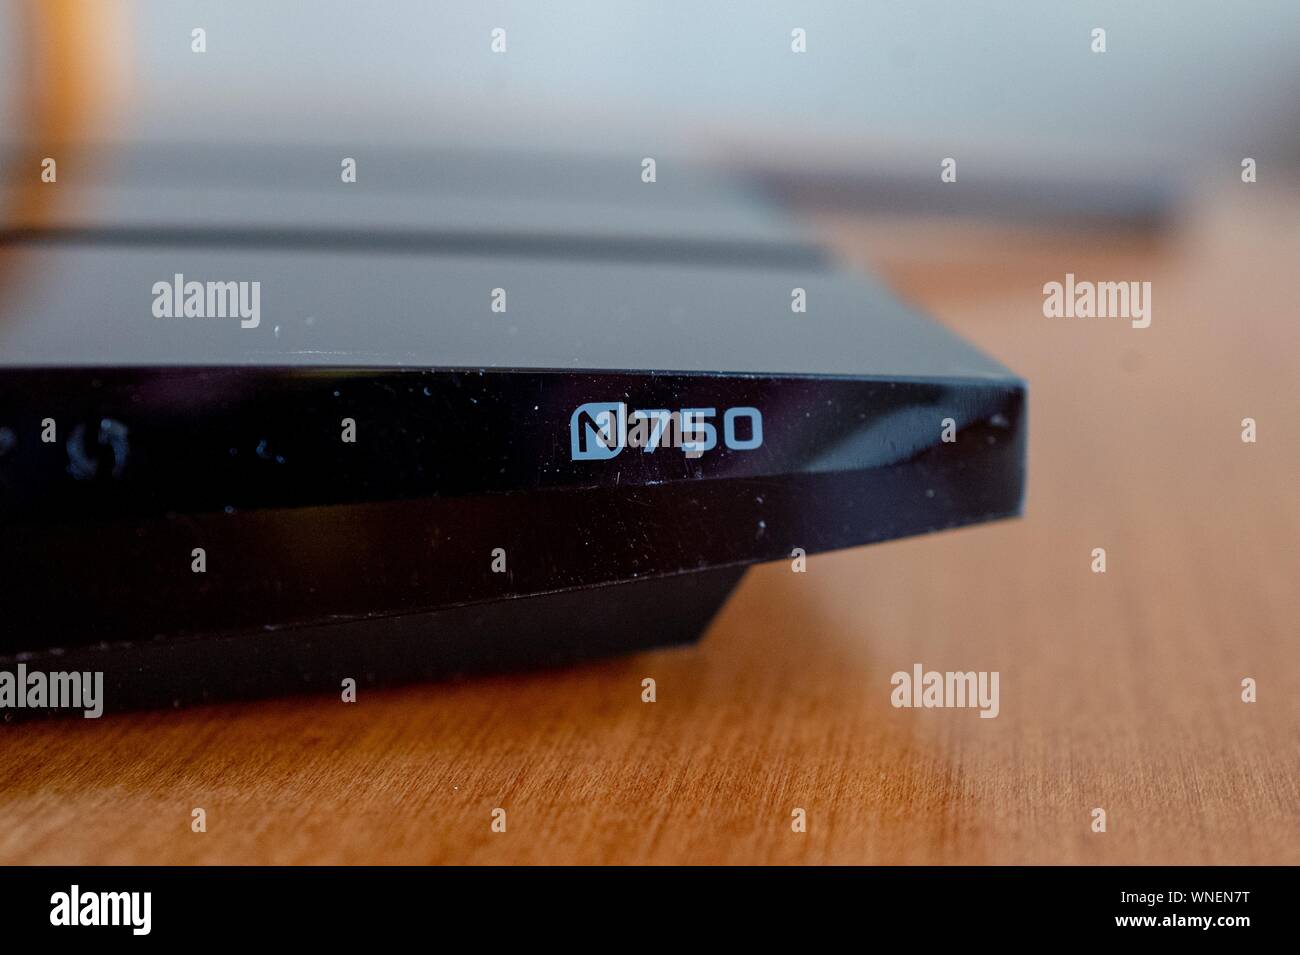 Close-up of logo for N750 router from Chinese networking equipment  manufacturer TP Link on light wooden surface, August 27, 2019 Stock Photo -  Alamy